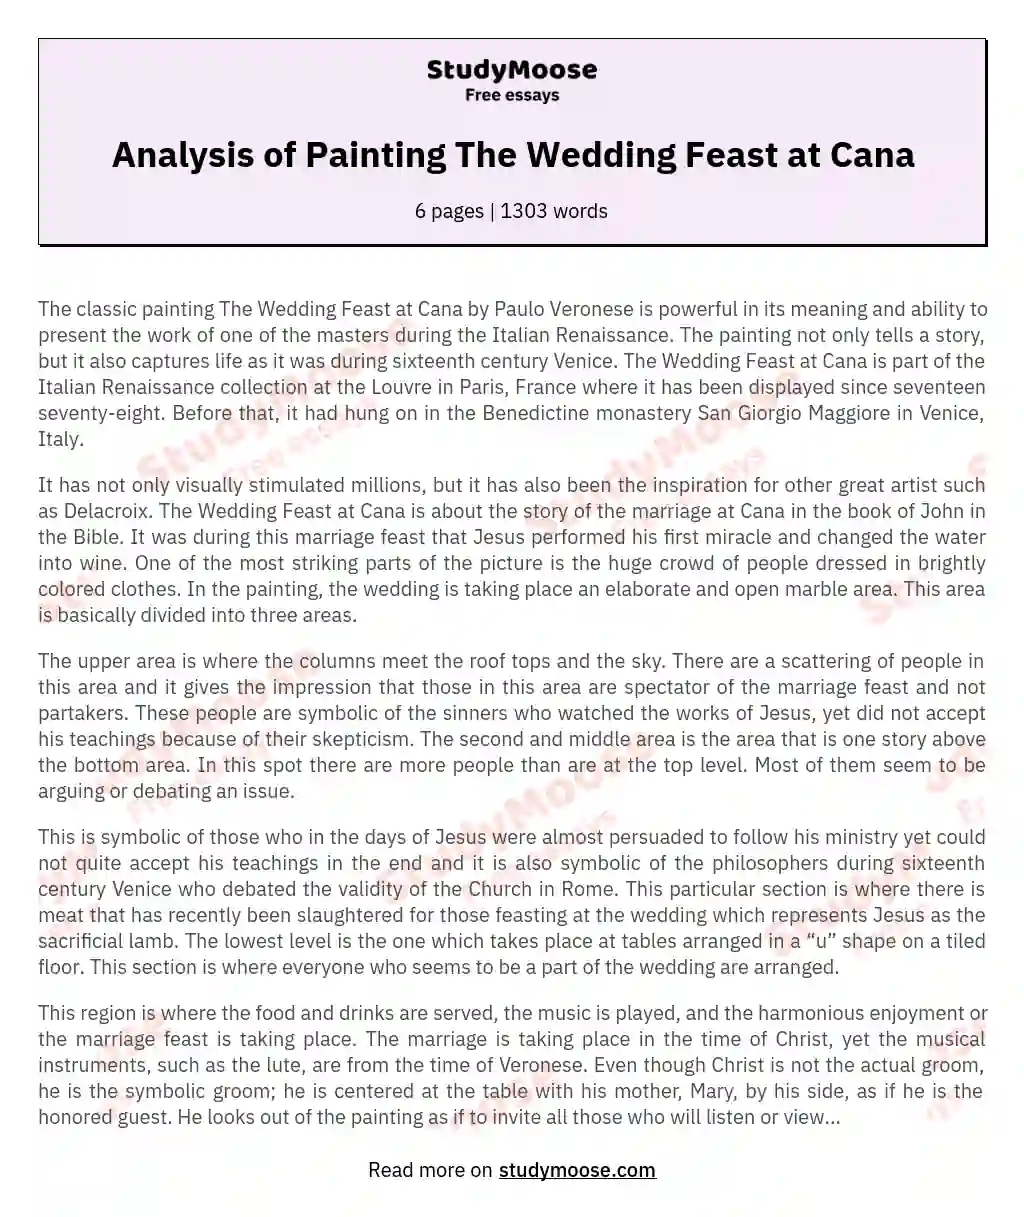 Analysis of Painting The Wedding Feast at Cana essay